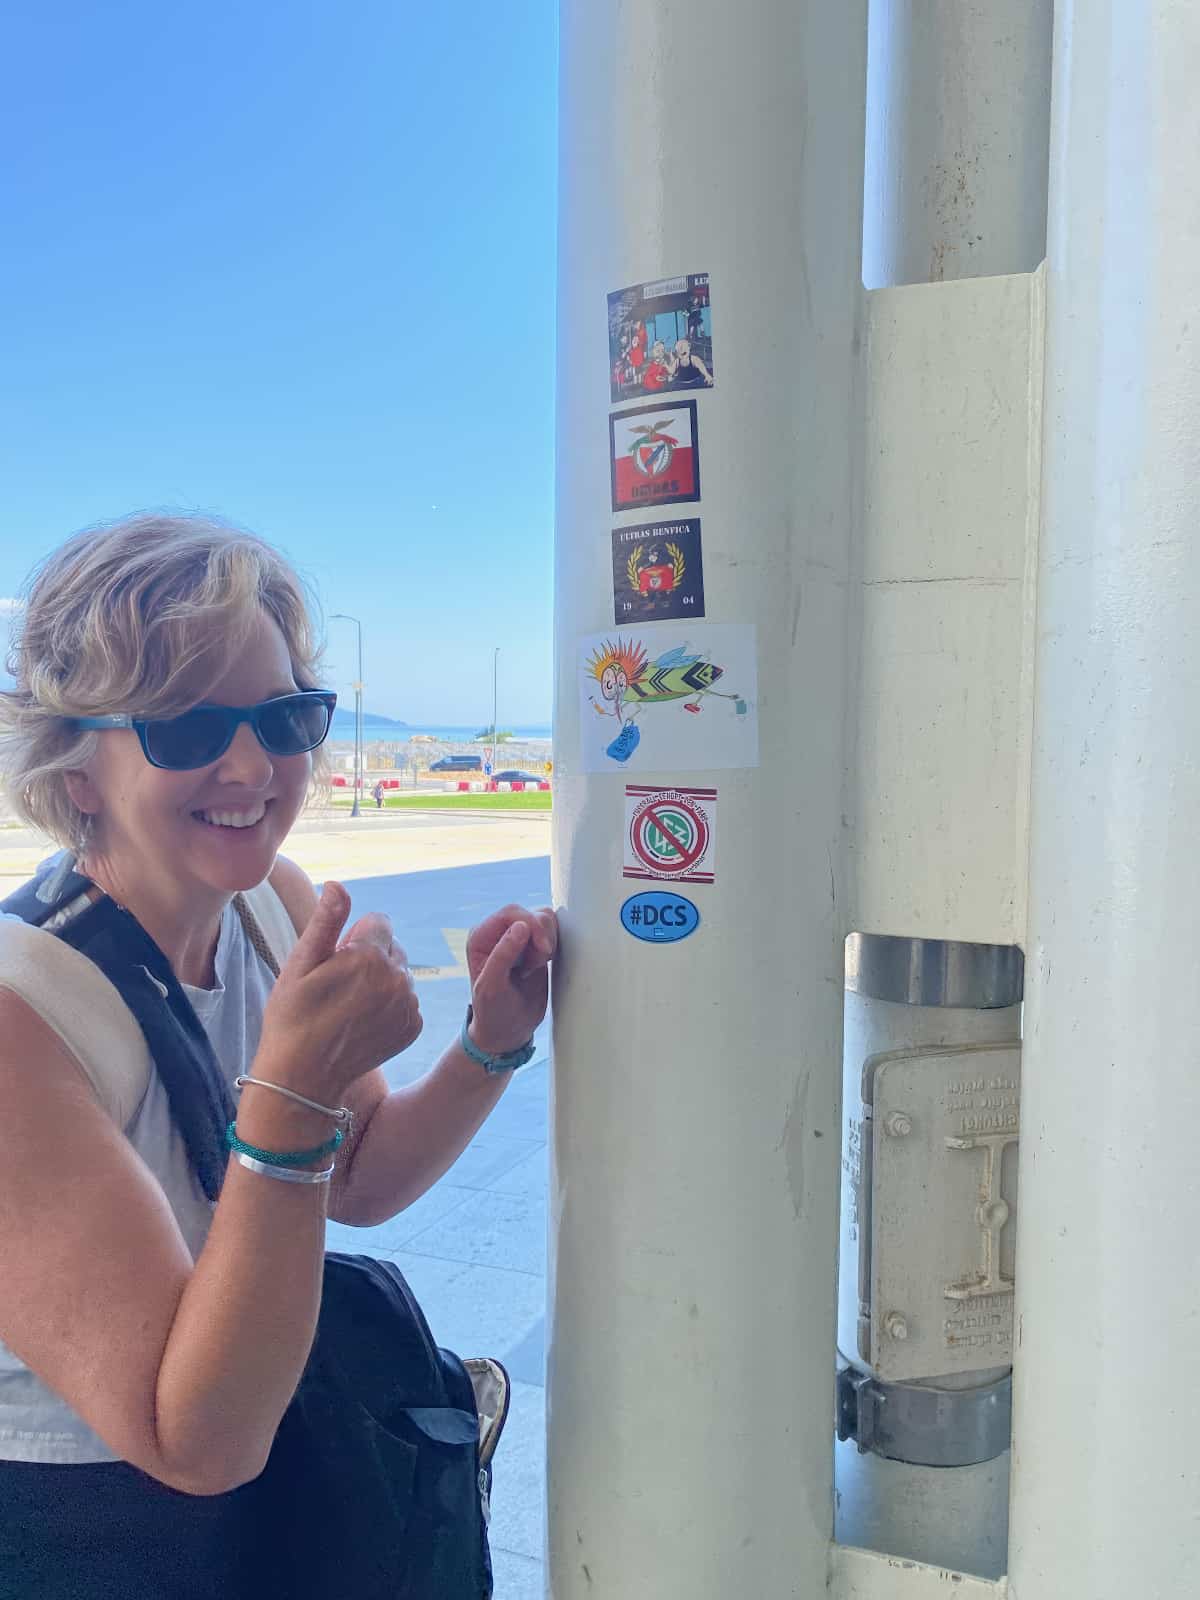 Amy Stearns thumbs up with #DCS sticker on a light pole